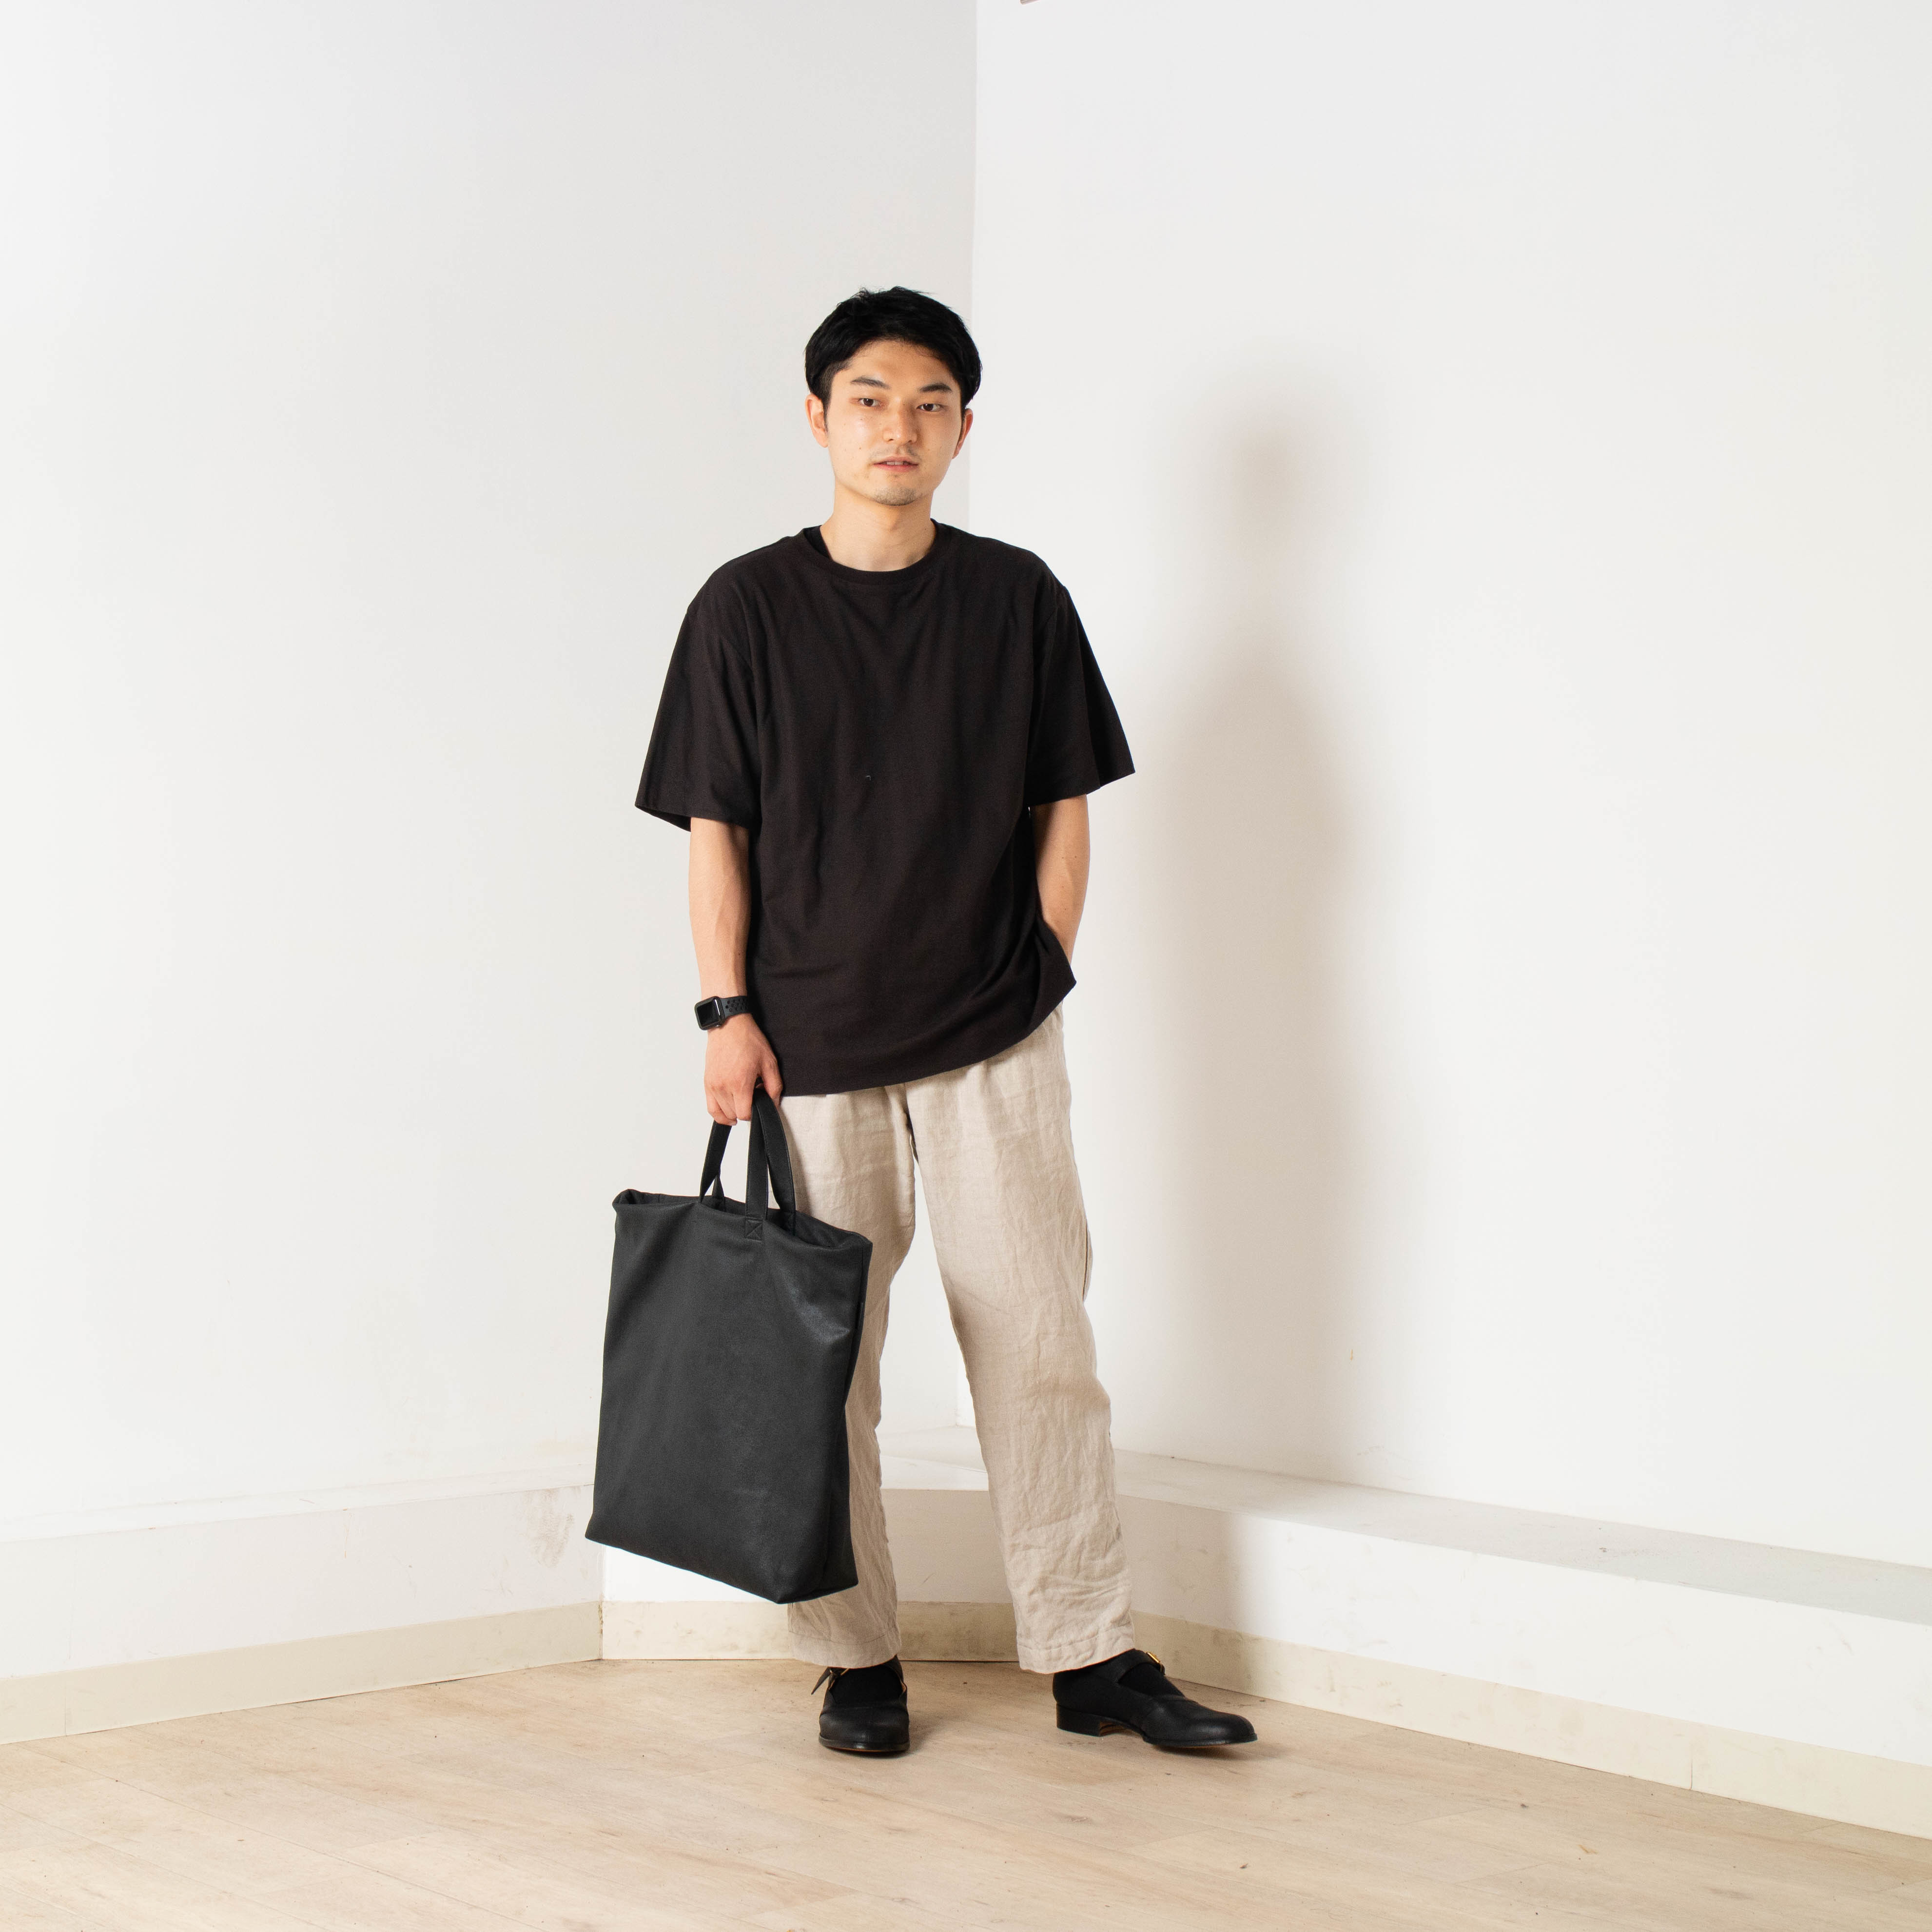 KaILI (カイリ) / 「S/H TWO DEVICE TOTE UN」 のご紹介 - WEEKENDER SHOP ブログ